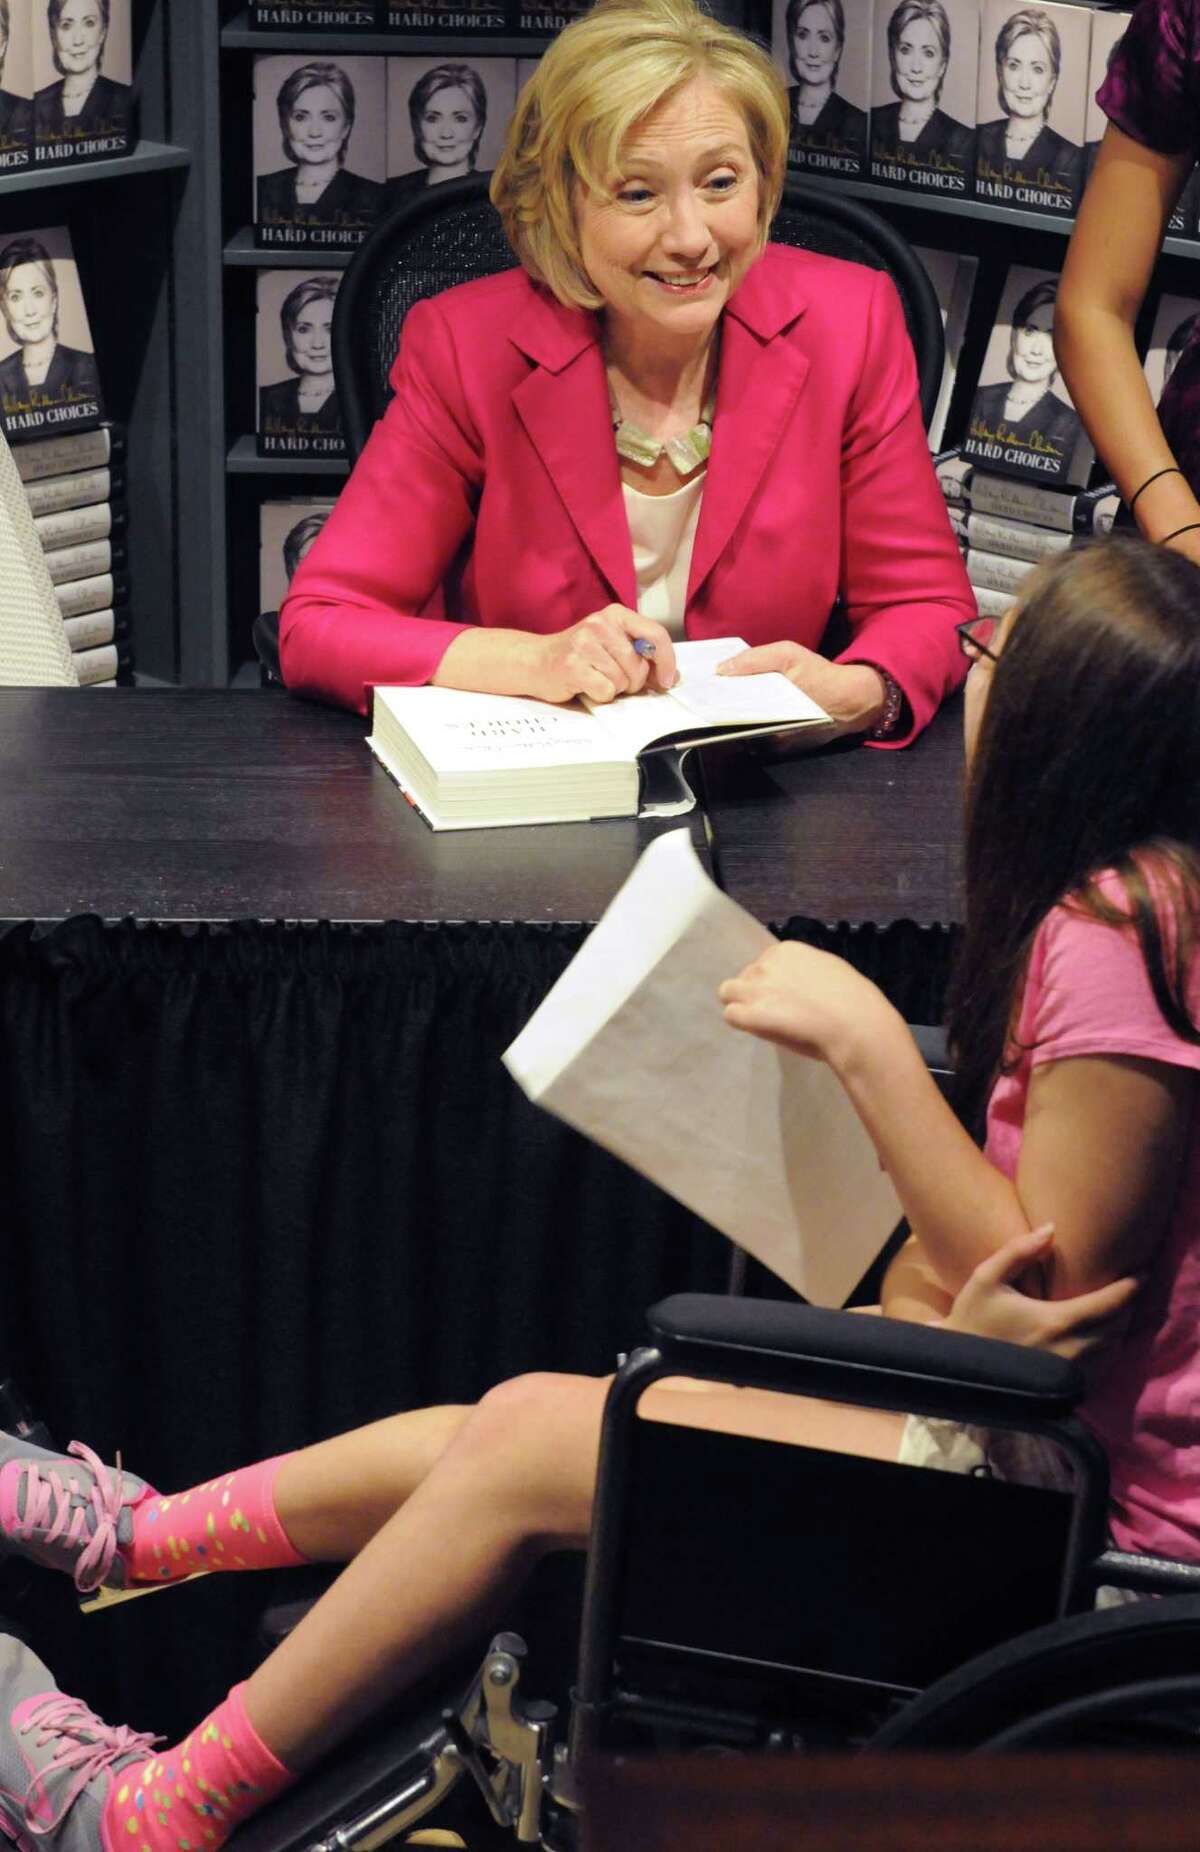 (Mara Lavitt ?‘ New Haven Register) July 19, 2014 Madison R.J. Julia Booksellers in Madison hosted a Hillary Clinton book signing for her book "Hard Choices." At least a thousand people got their copies signed. Clinton met Sullivan Bono of Guilford who talked to Clinton about Dystonia, a condition Bono has. mlavitt@newhavenregister.com